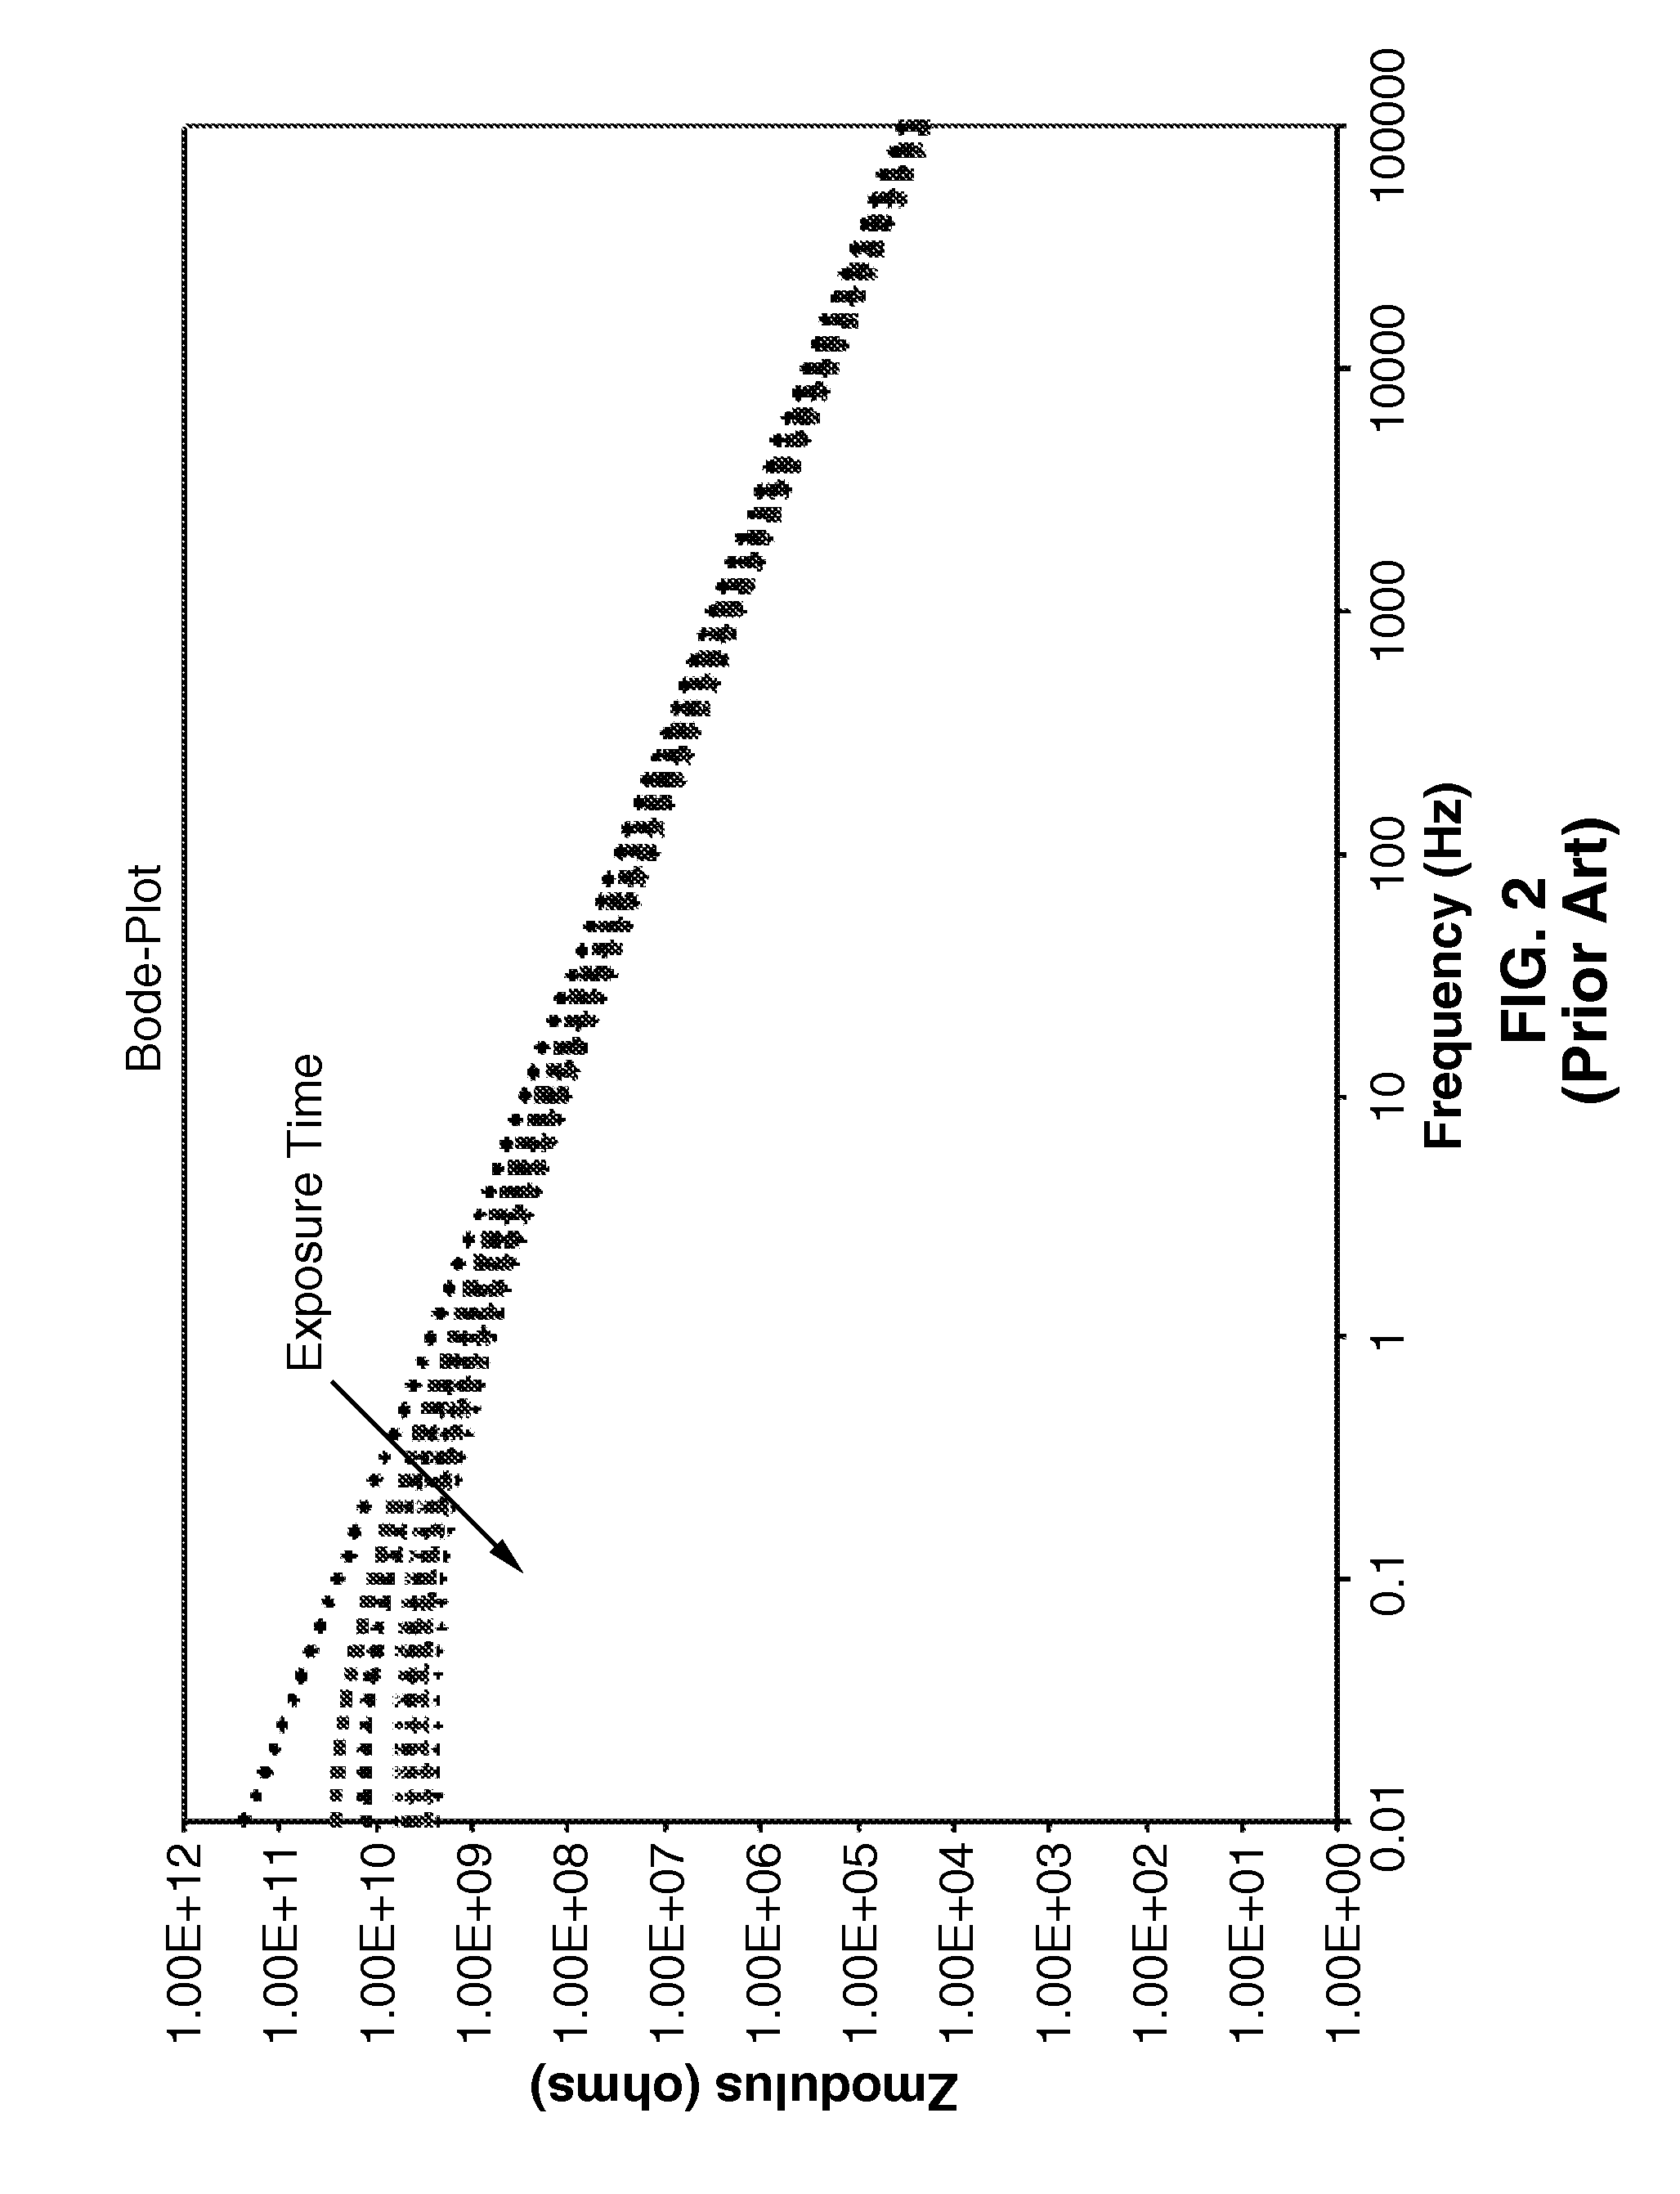 Electrochemical impedance spectroscopy method and system